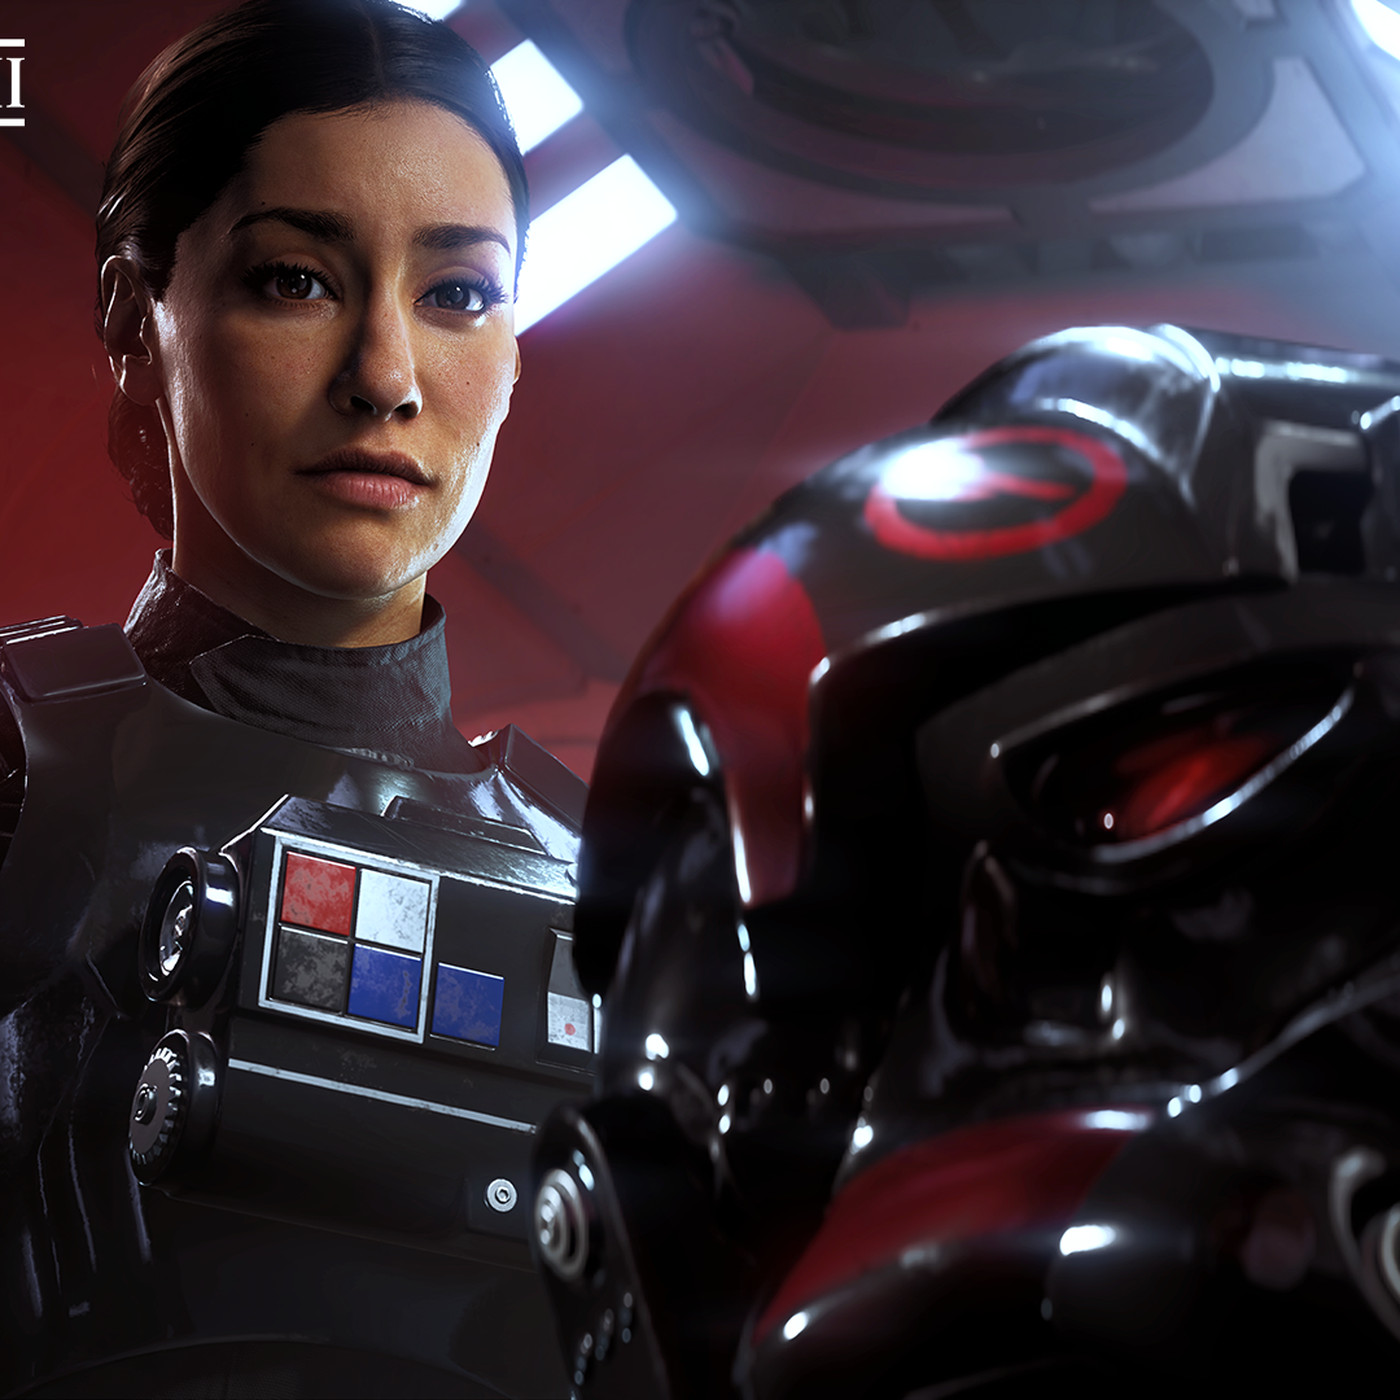 Star Wars Battlefront II's Single Player Campaign Is A Great New Story With A Nostalgia Problem